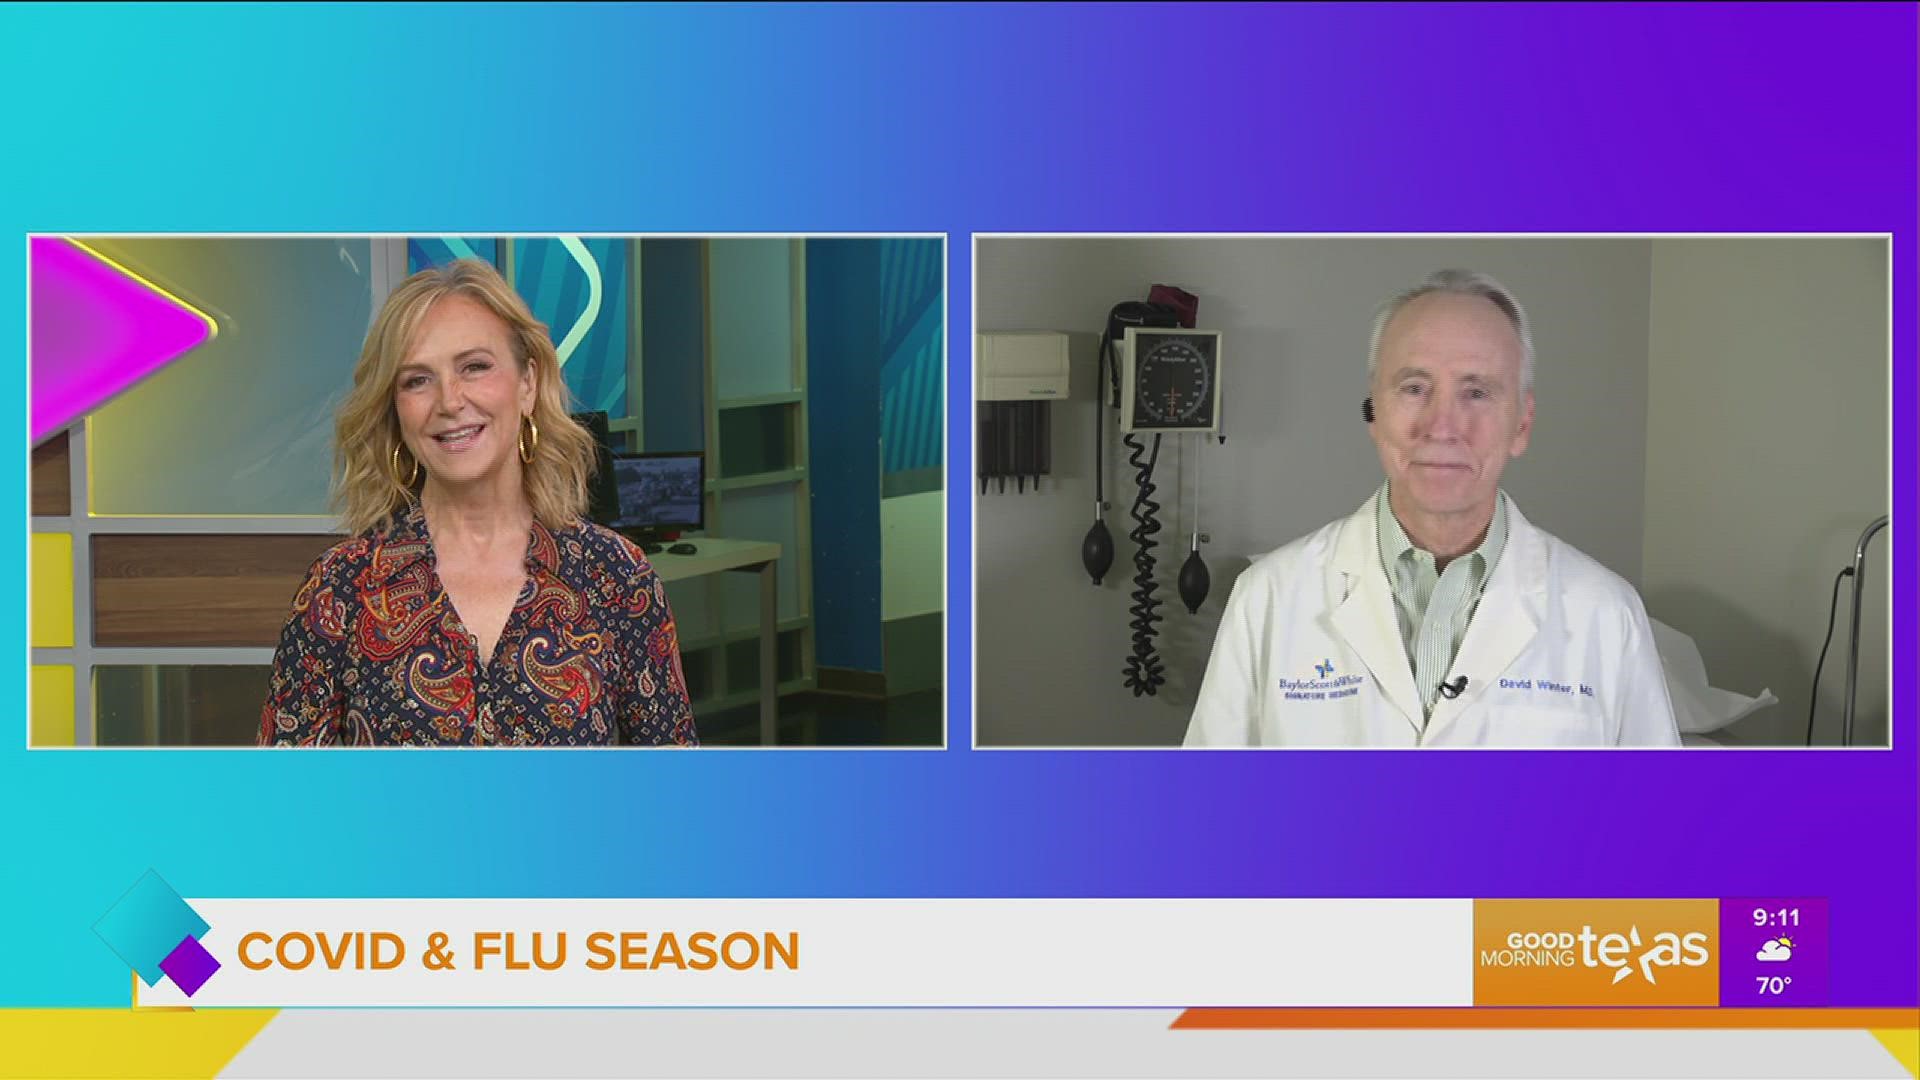 Dr. David Winter of Baylor Scott & White Health talks about the possibility of a severe flu season, flu shots and Covid-19 vaccines and boosters.